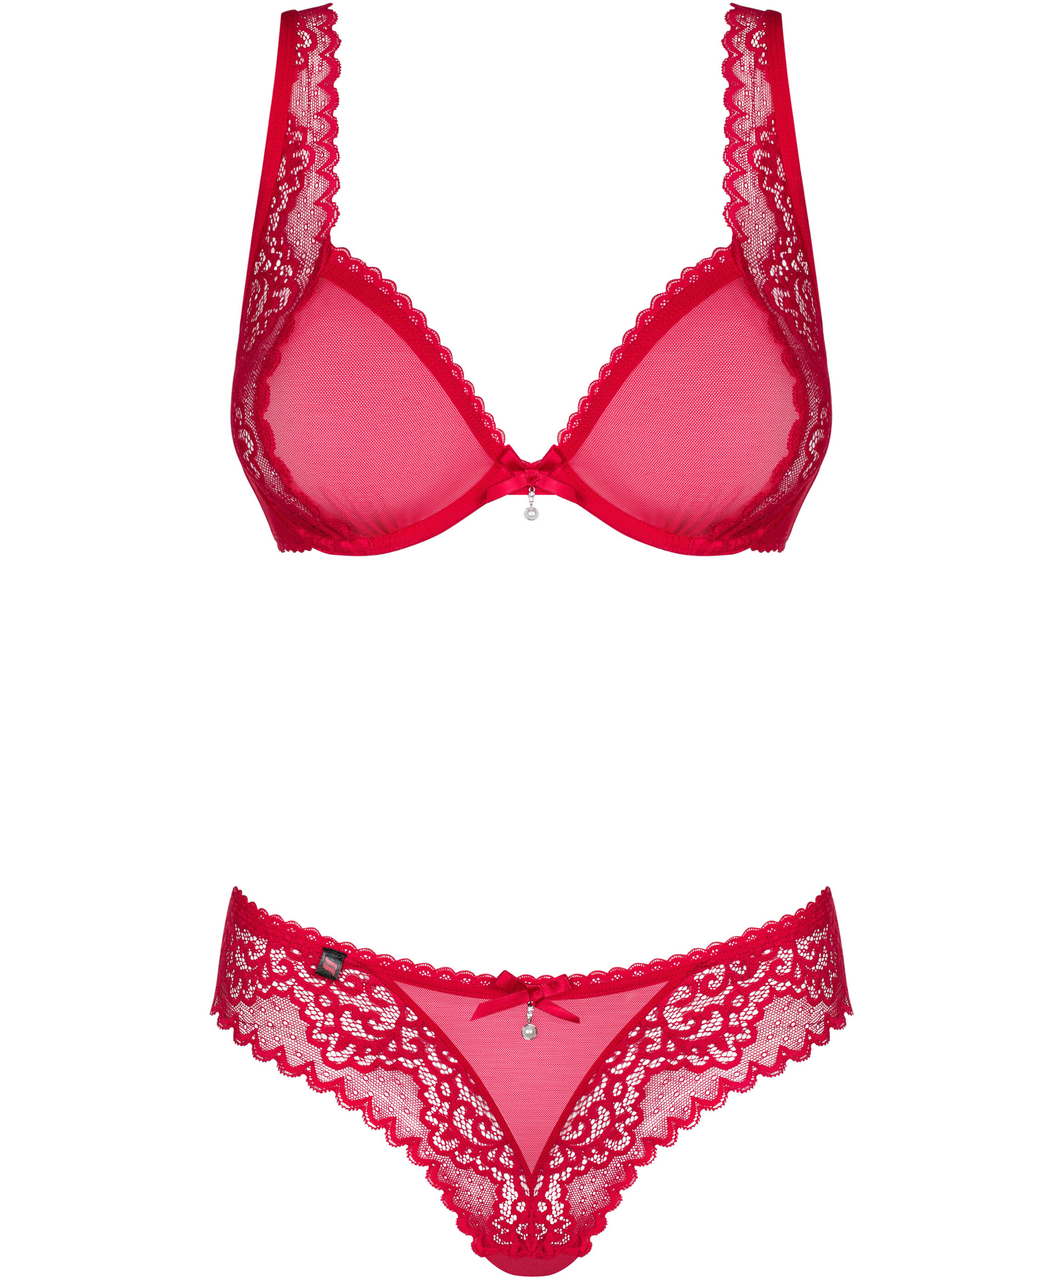 Obsessive red lace two-piece lingerie set